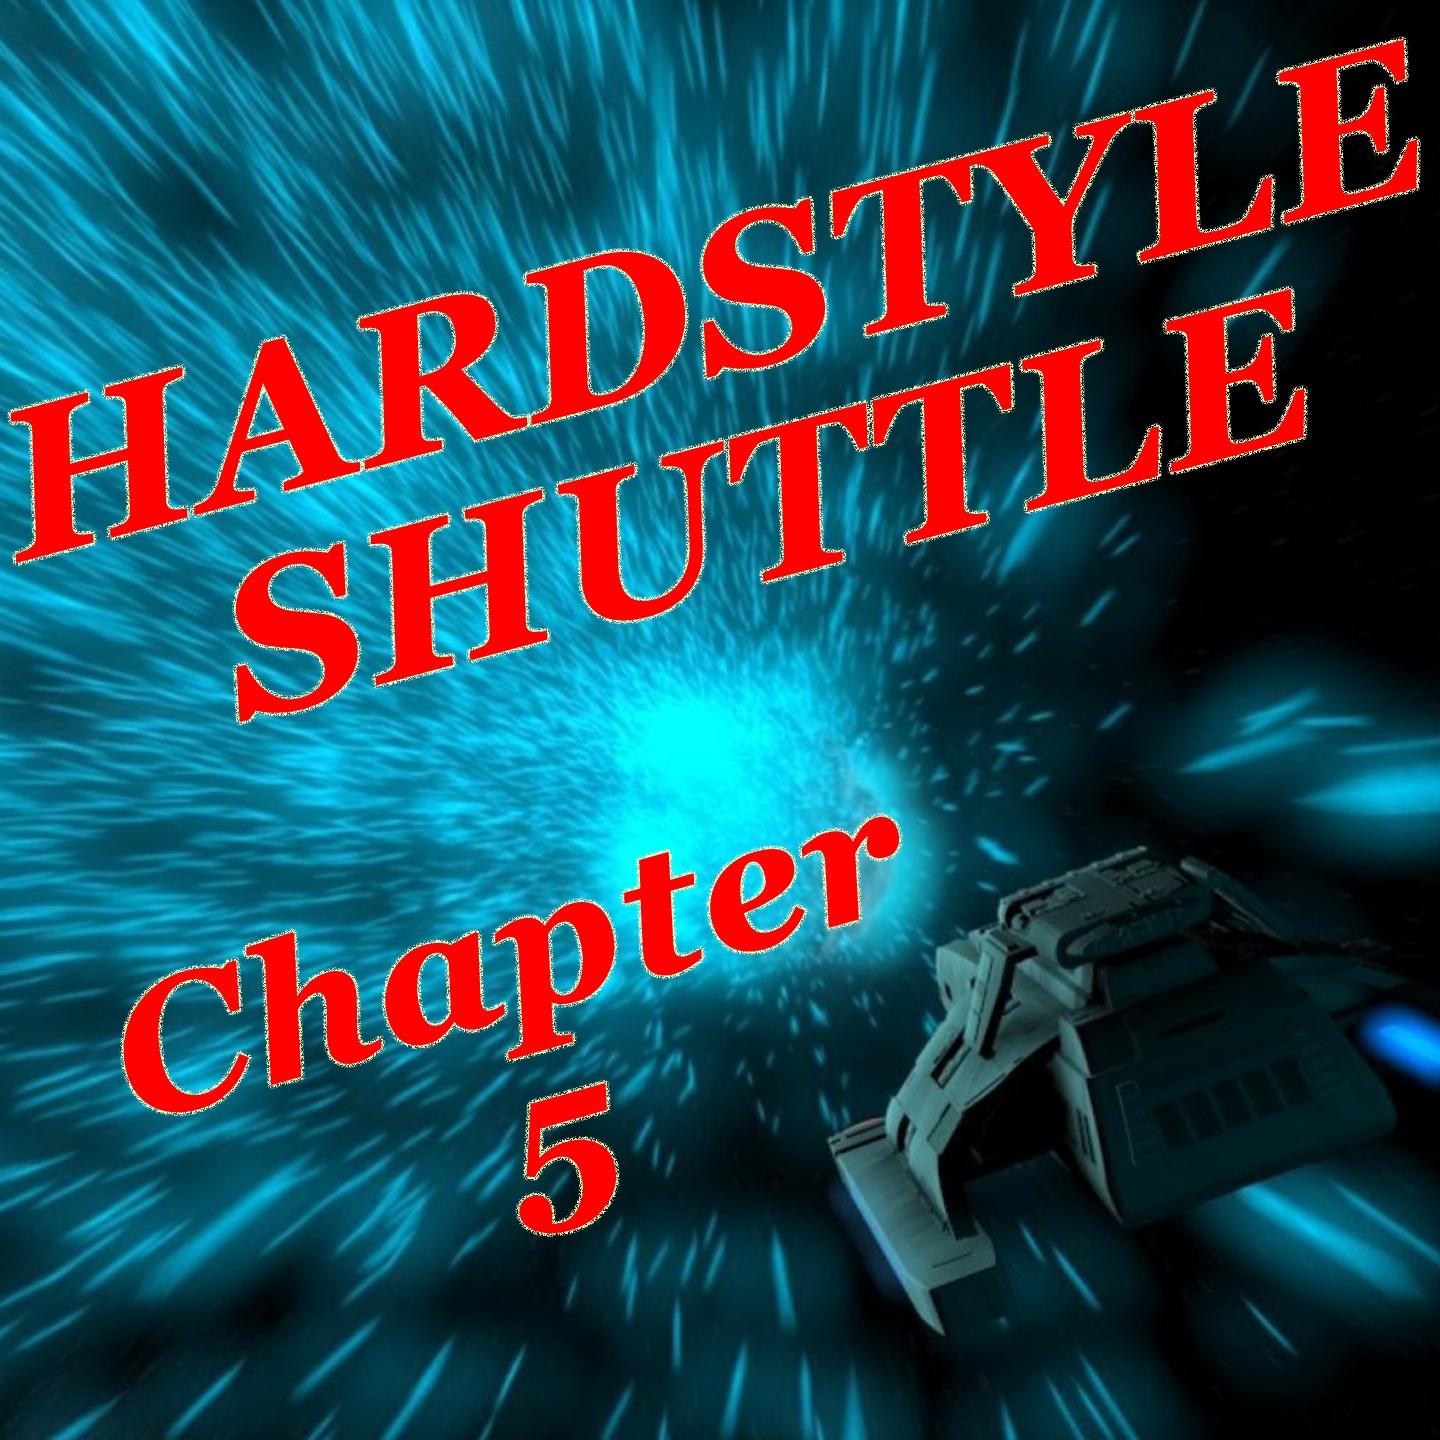 Hardstyle Shuttle Chapter 5